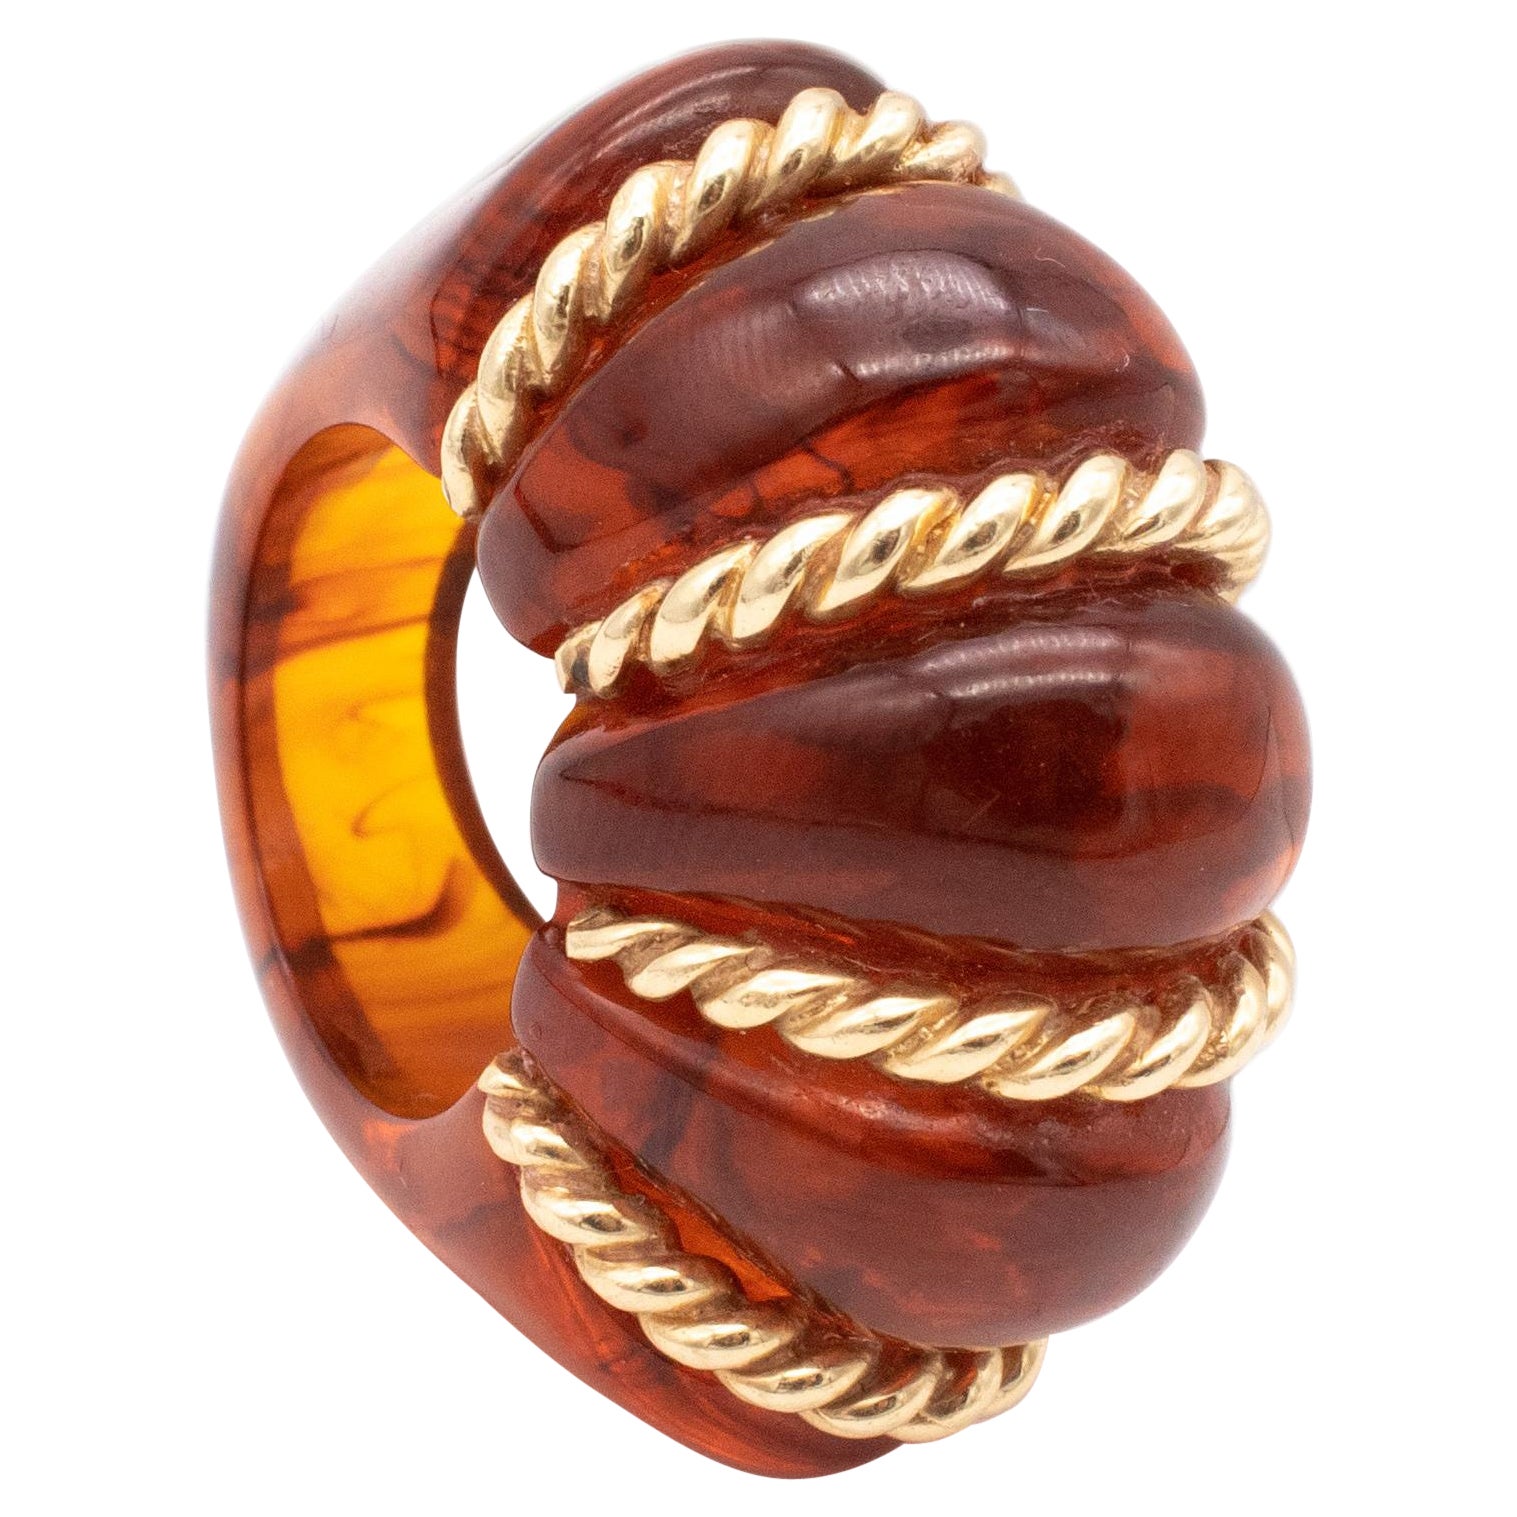 Seaman Schepps 1950 New York Very Rare 18Kt Gold Wired Ring Carved in Amber For Sale